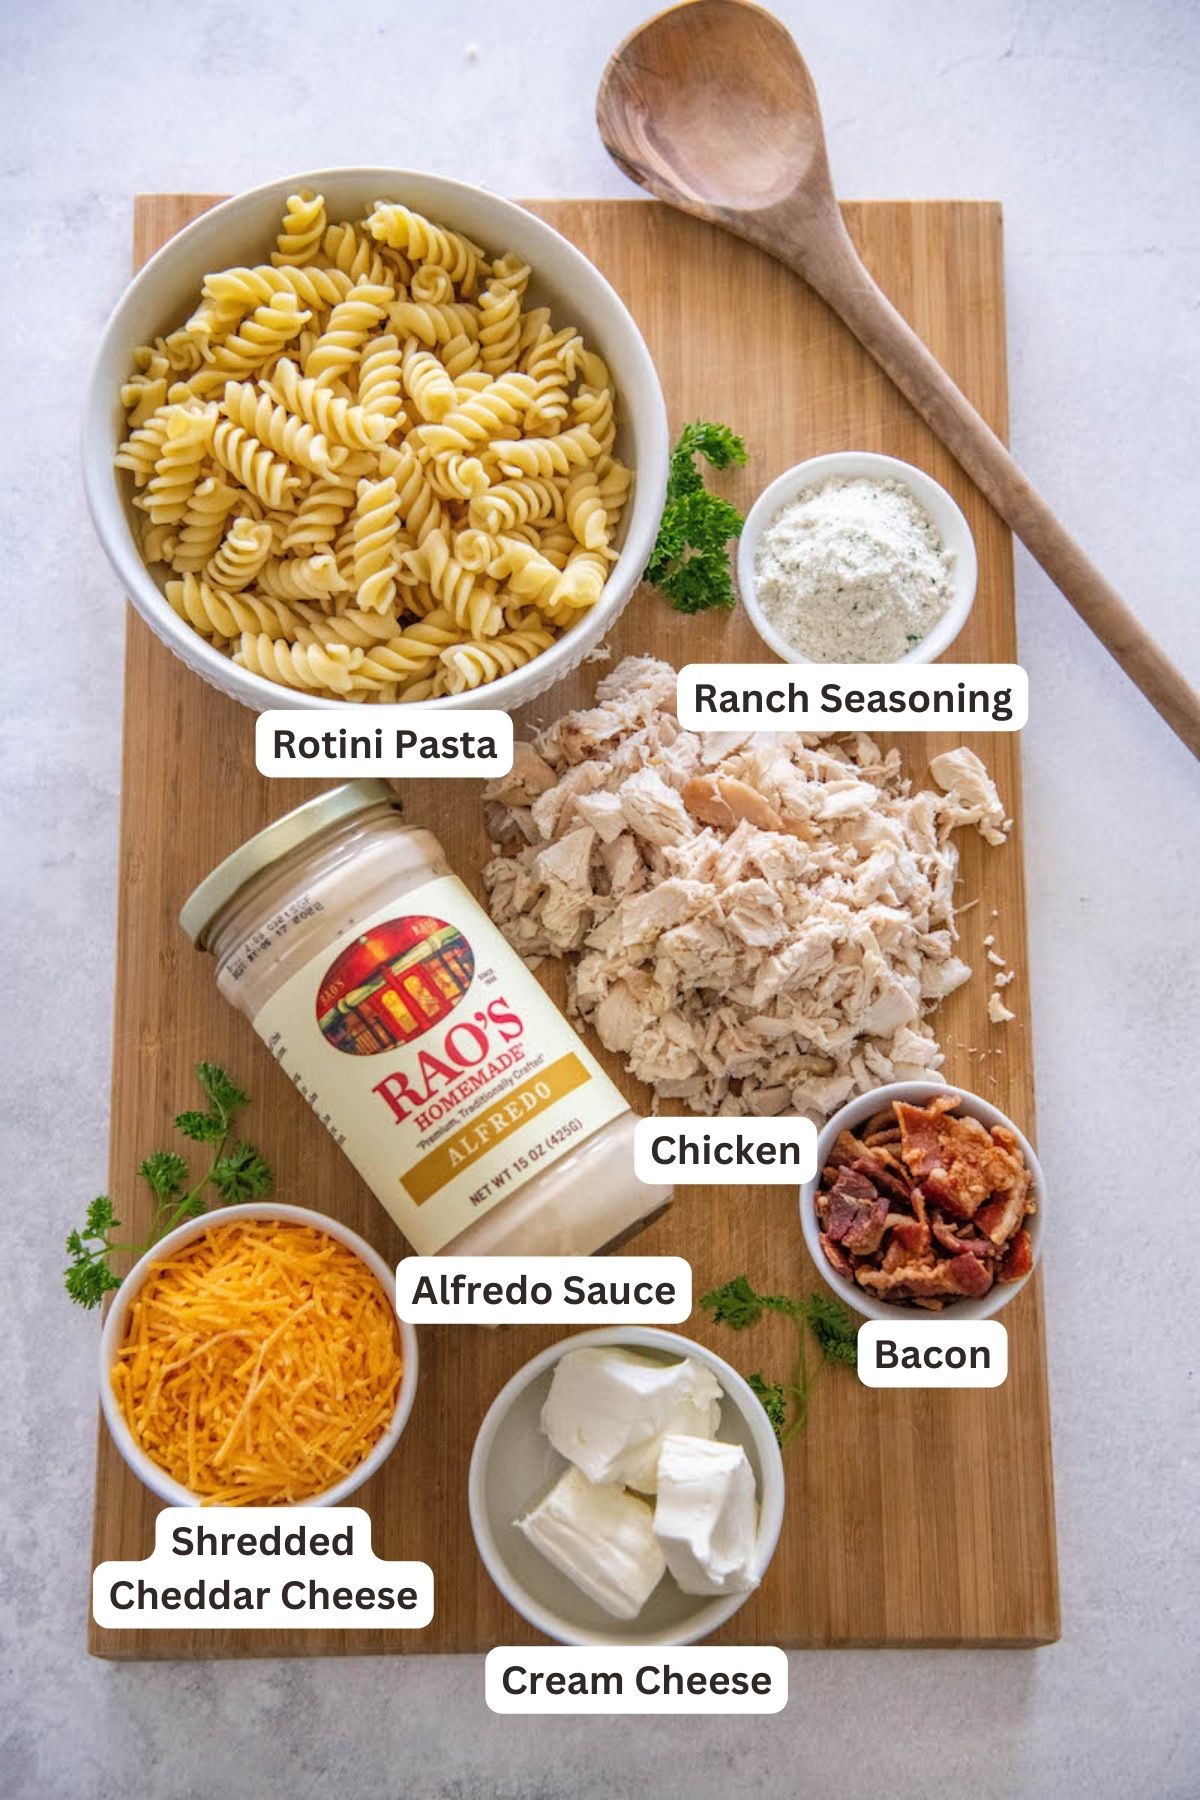 Ingredients for Chicken Bacon Ranch Pasta.